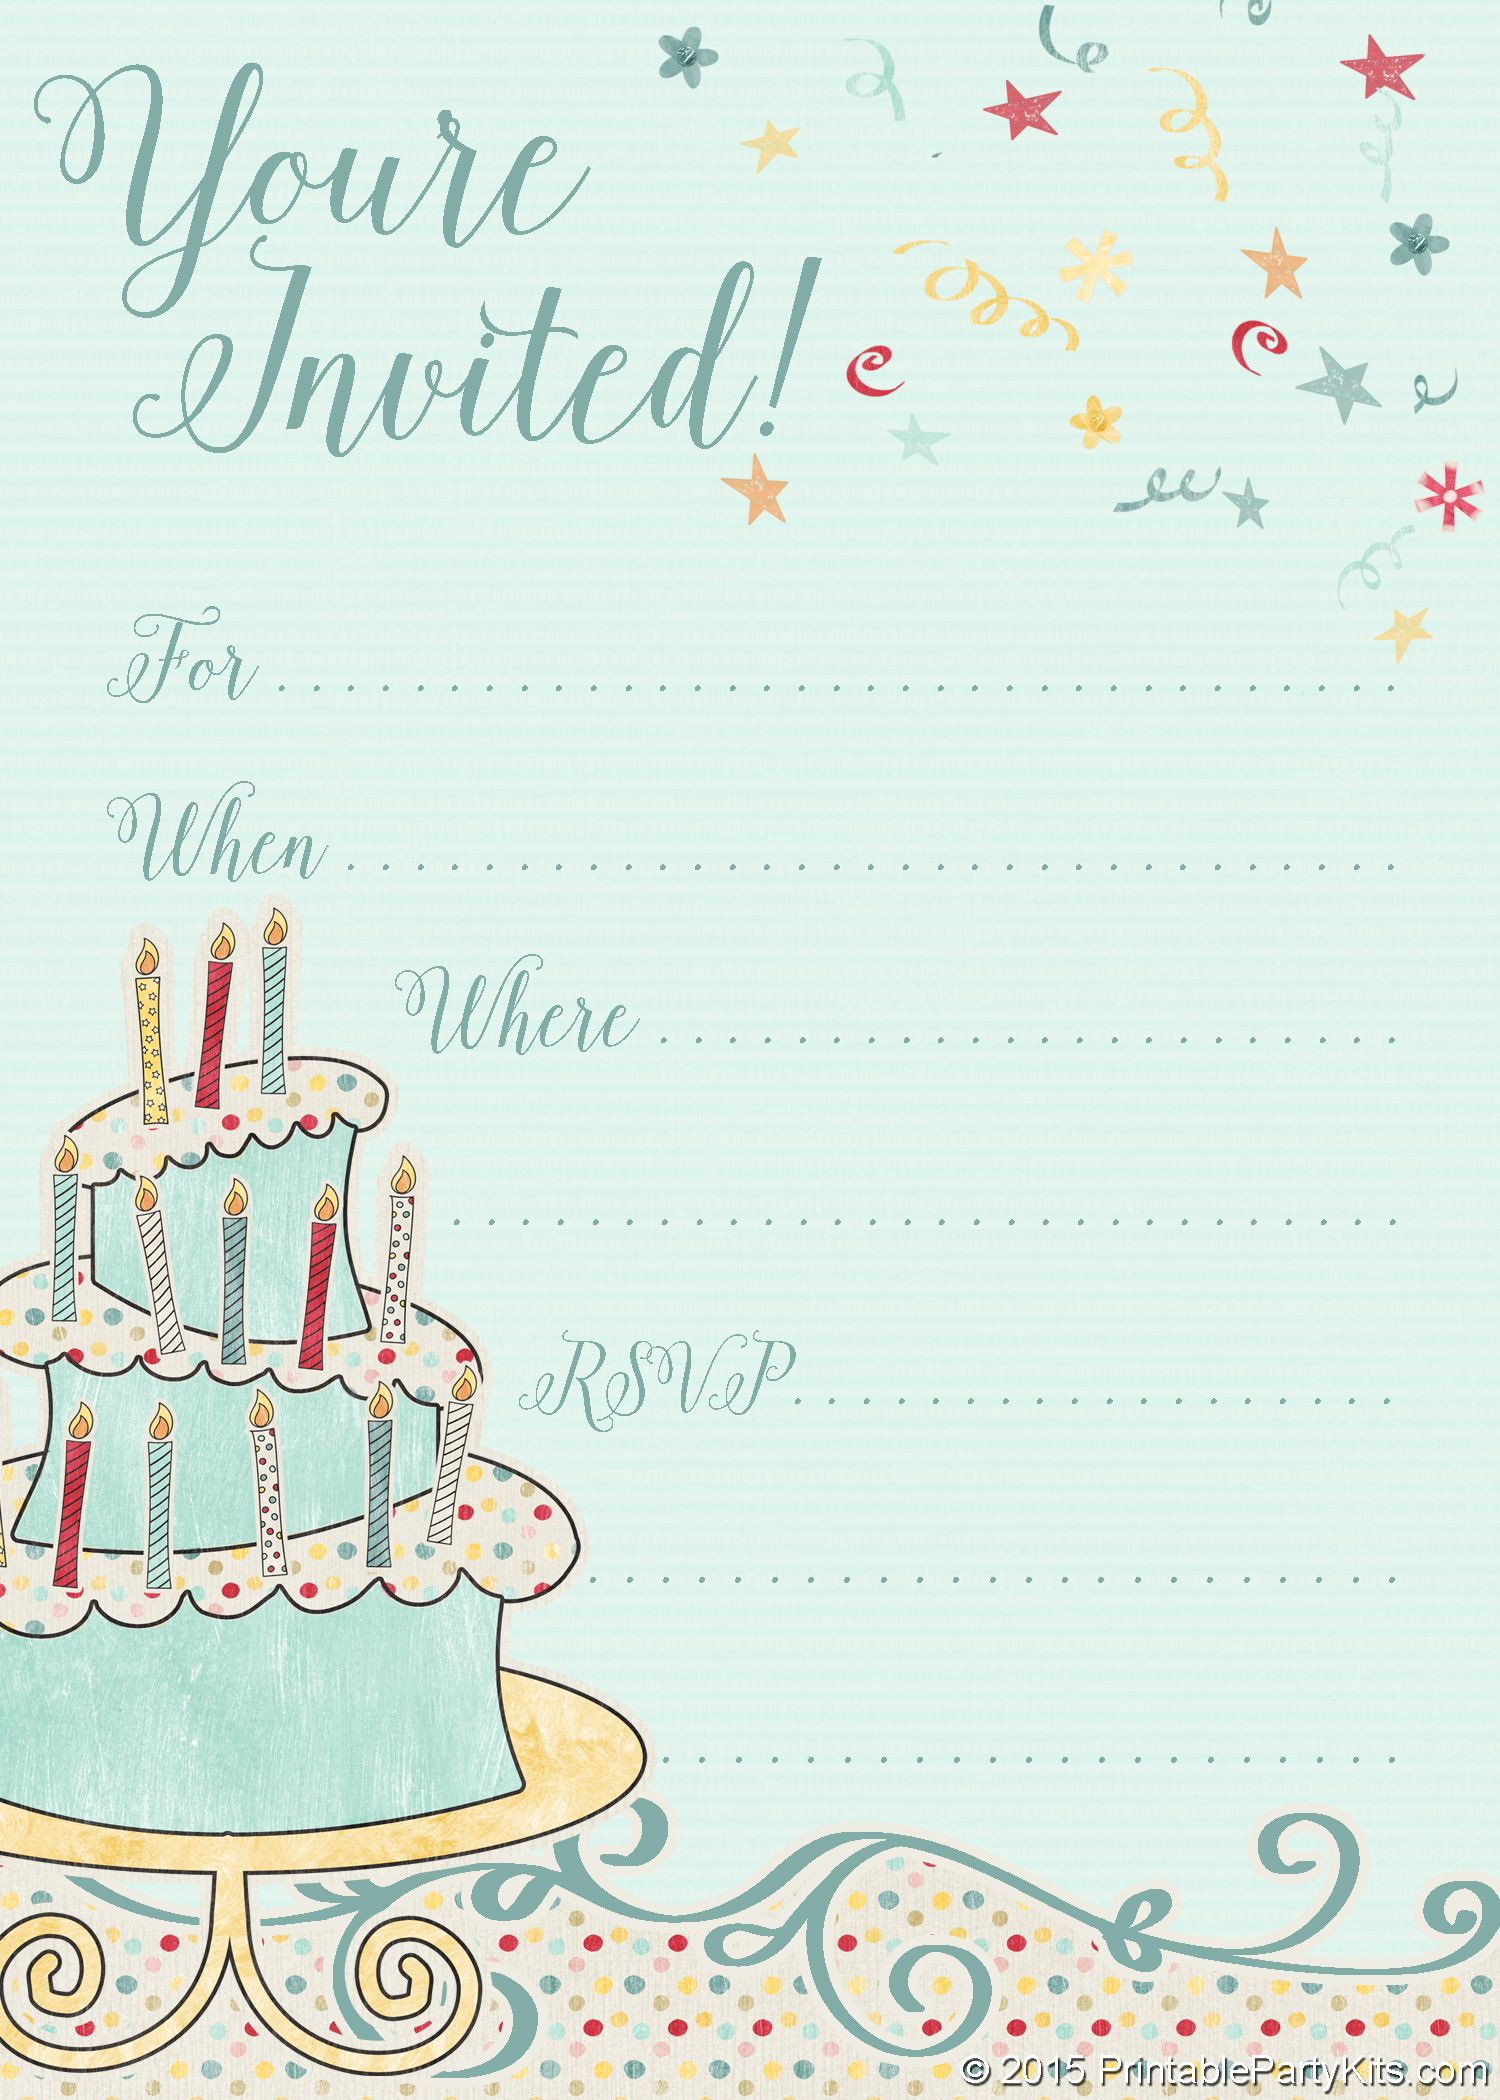 Templates For Birthday Invitations
 FREE Printable Whimsical Birthday Party Invitation